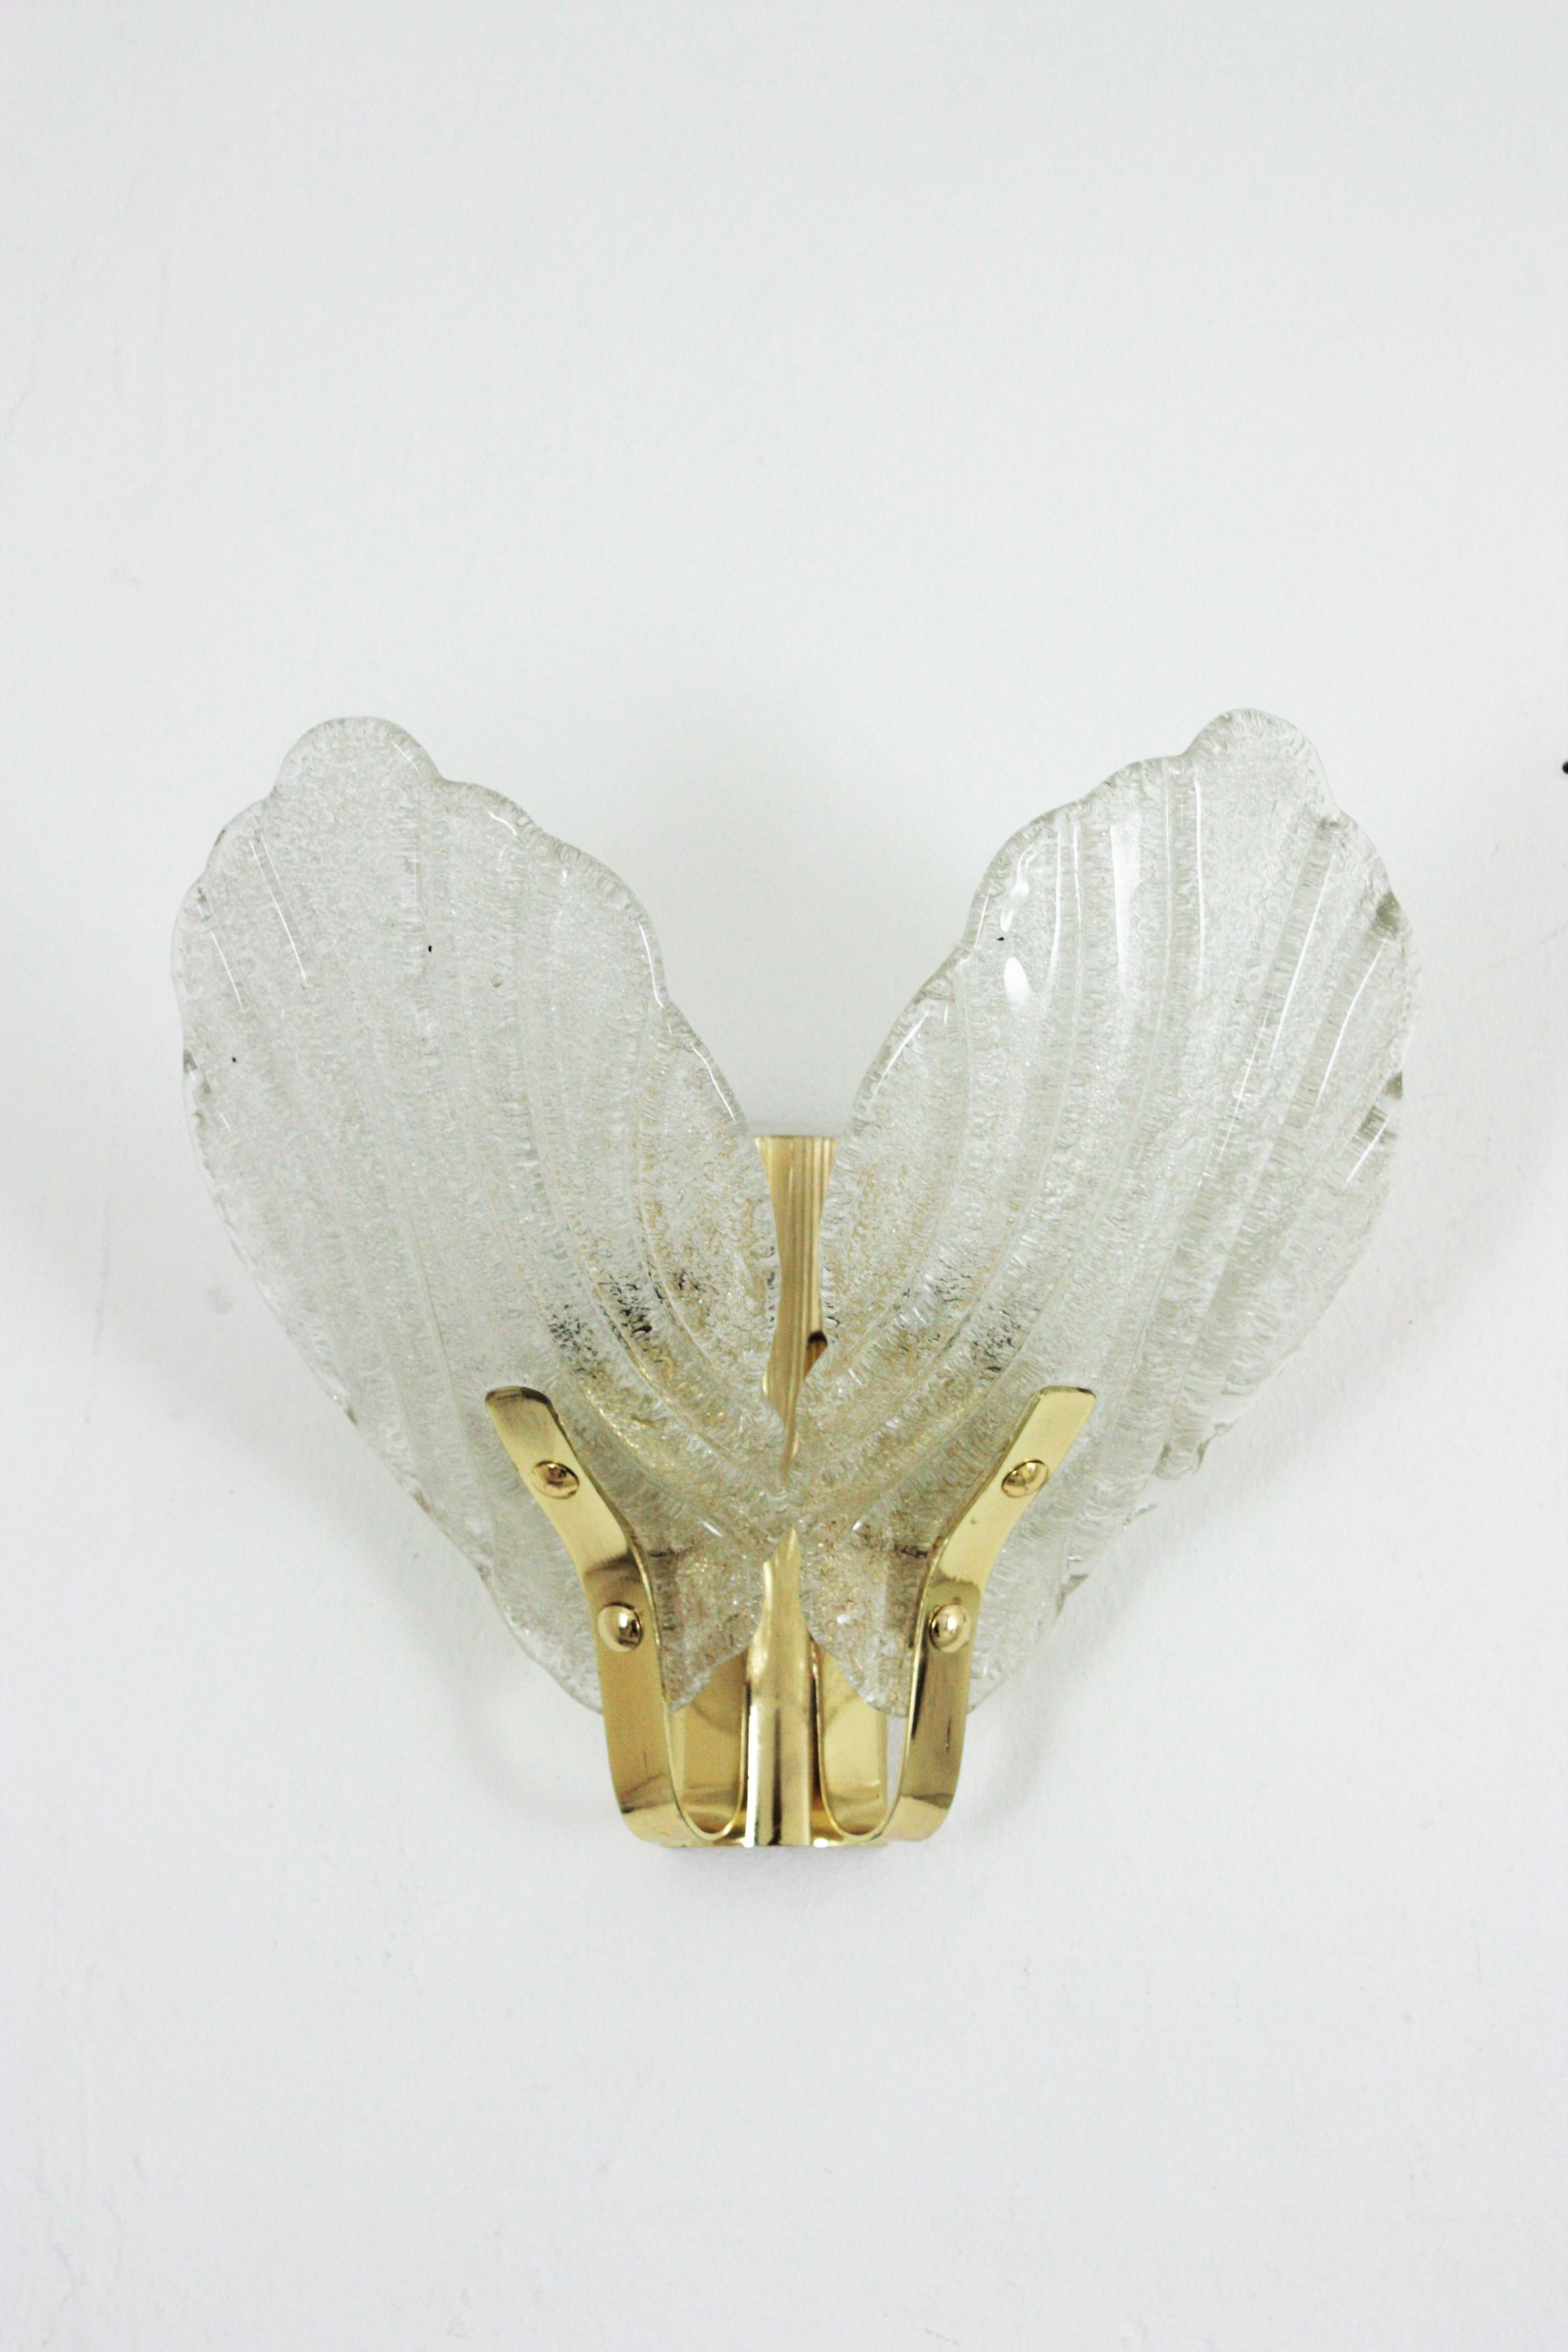 Mid-Century Modern Pair of Orrefors Fagerlund Double Leaf Wall Sconces in Glass and Brass, 1960s For Sale